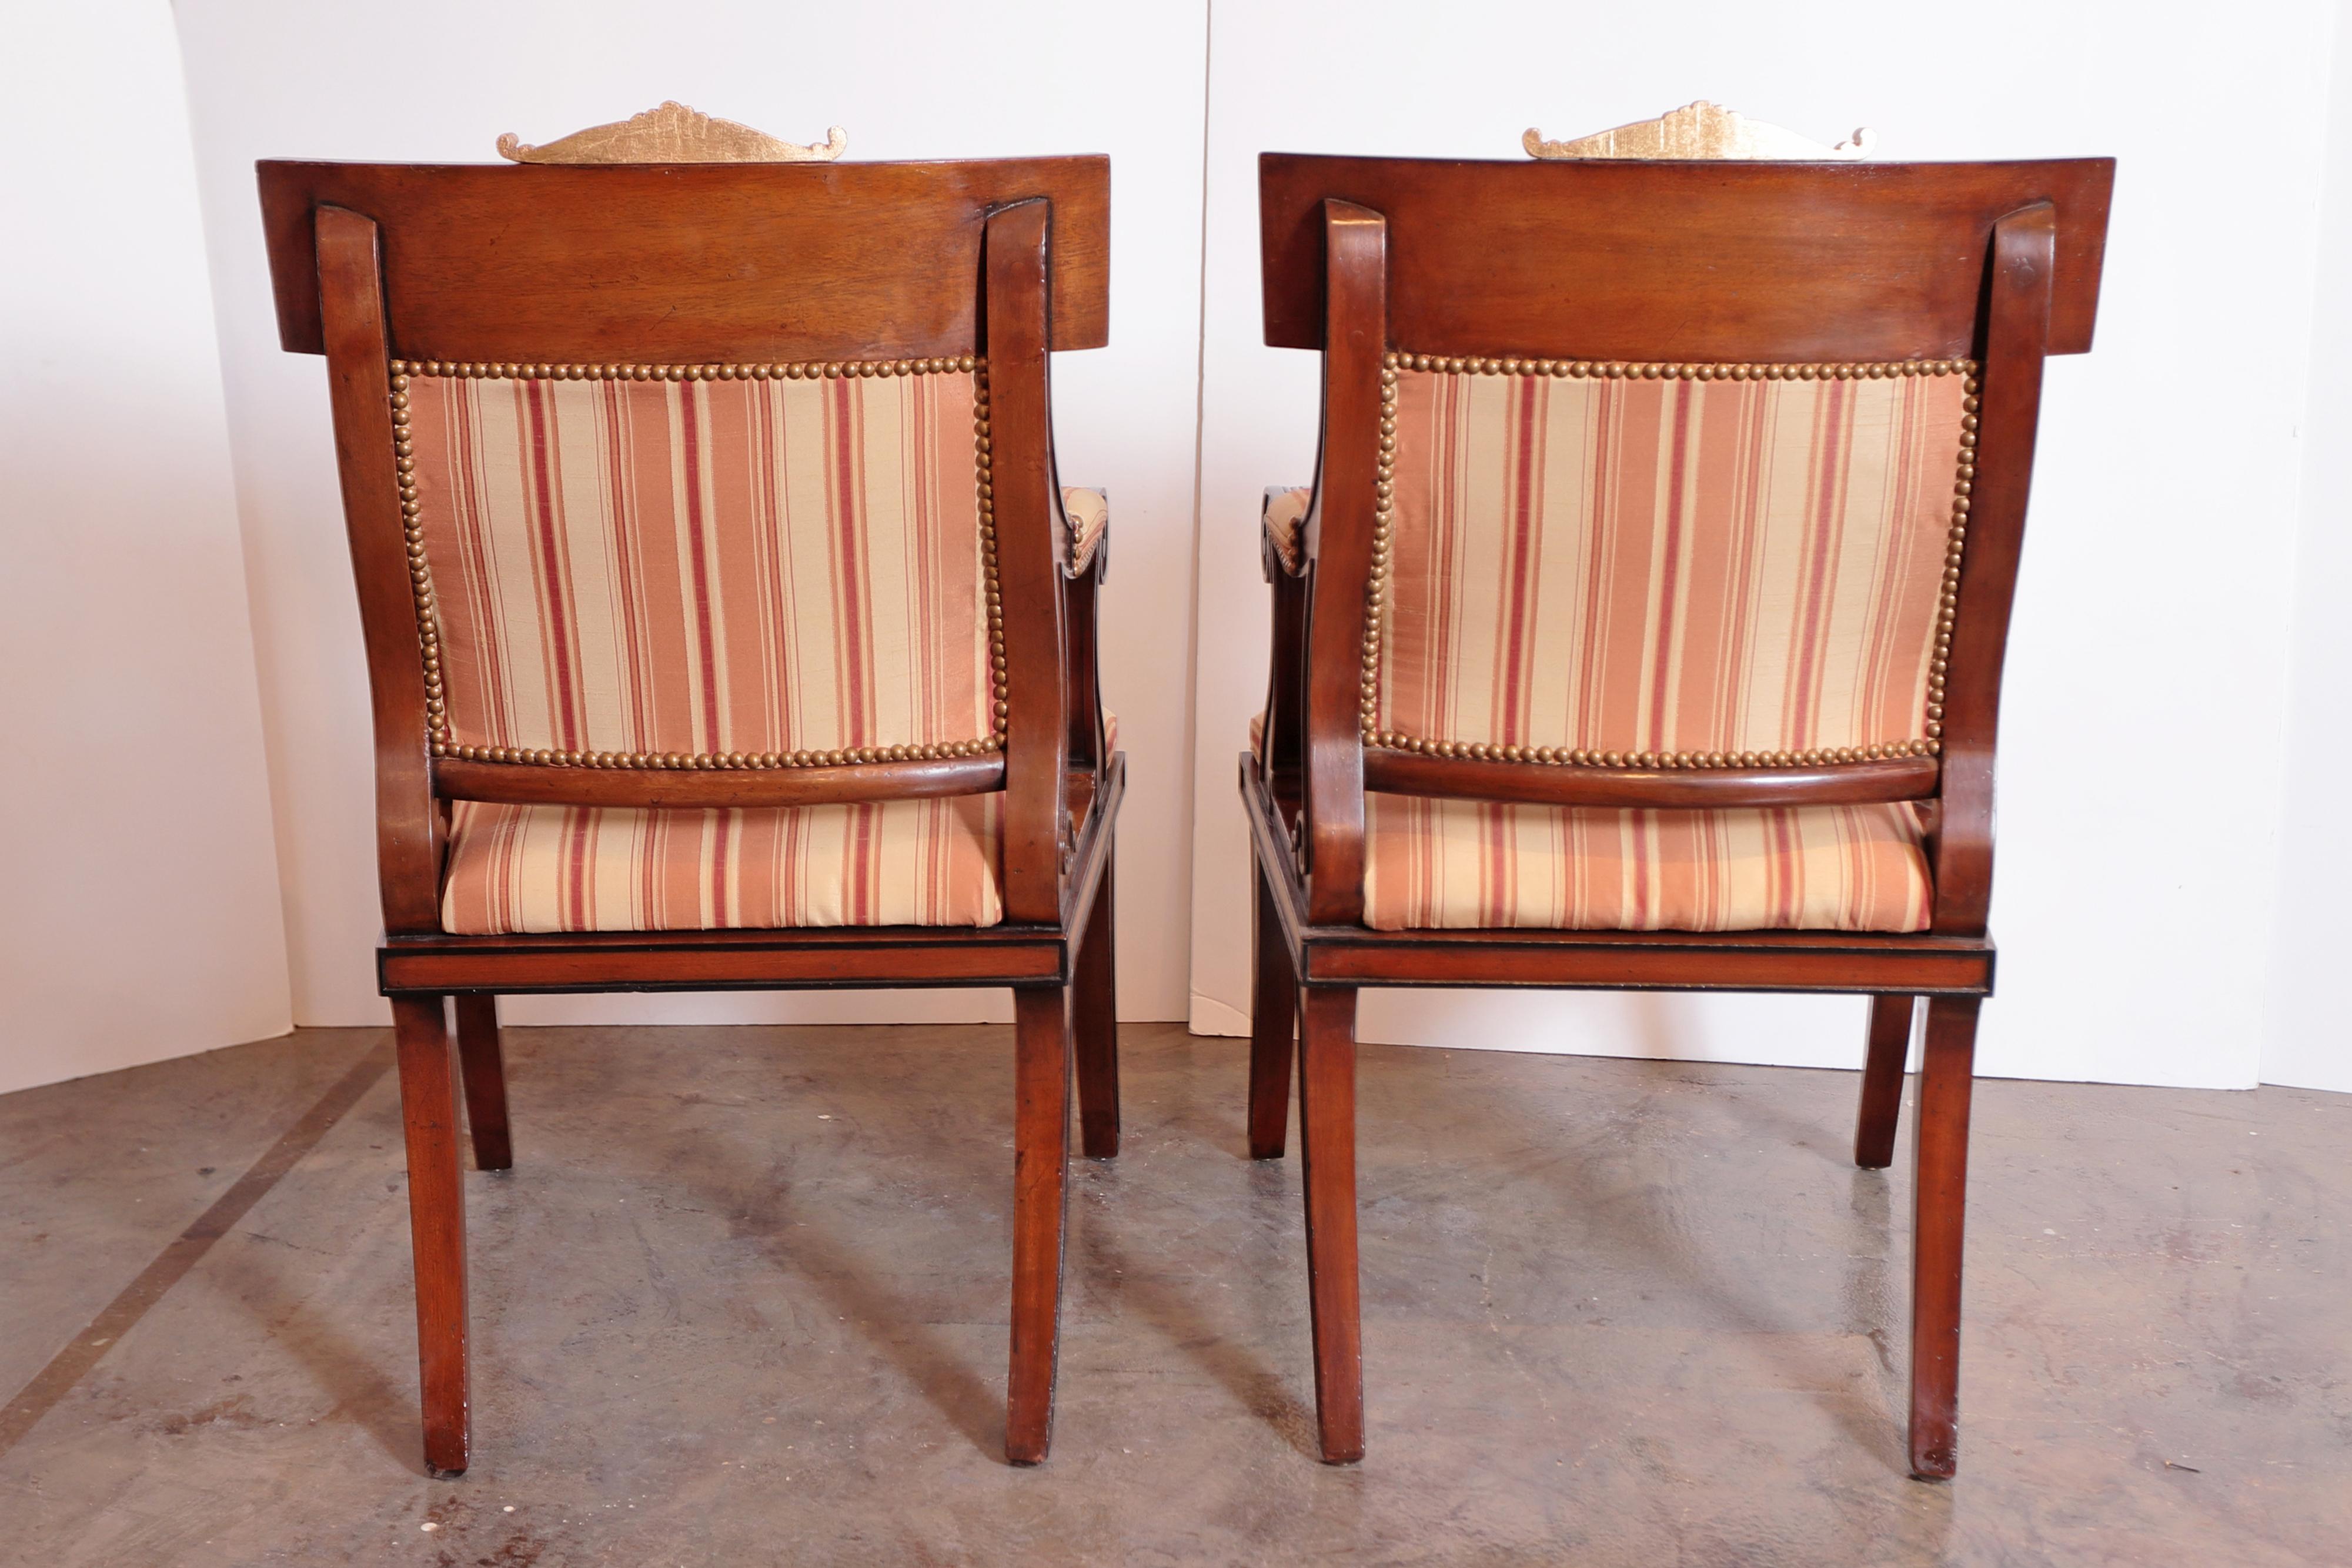 Rare Set of 10 English Regency Style Dining Chairs In Good Condition For Sale In Dallas, TX